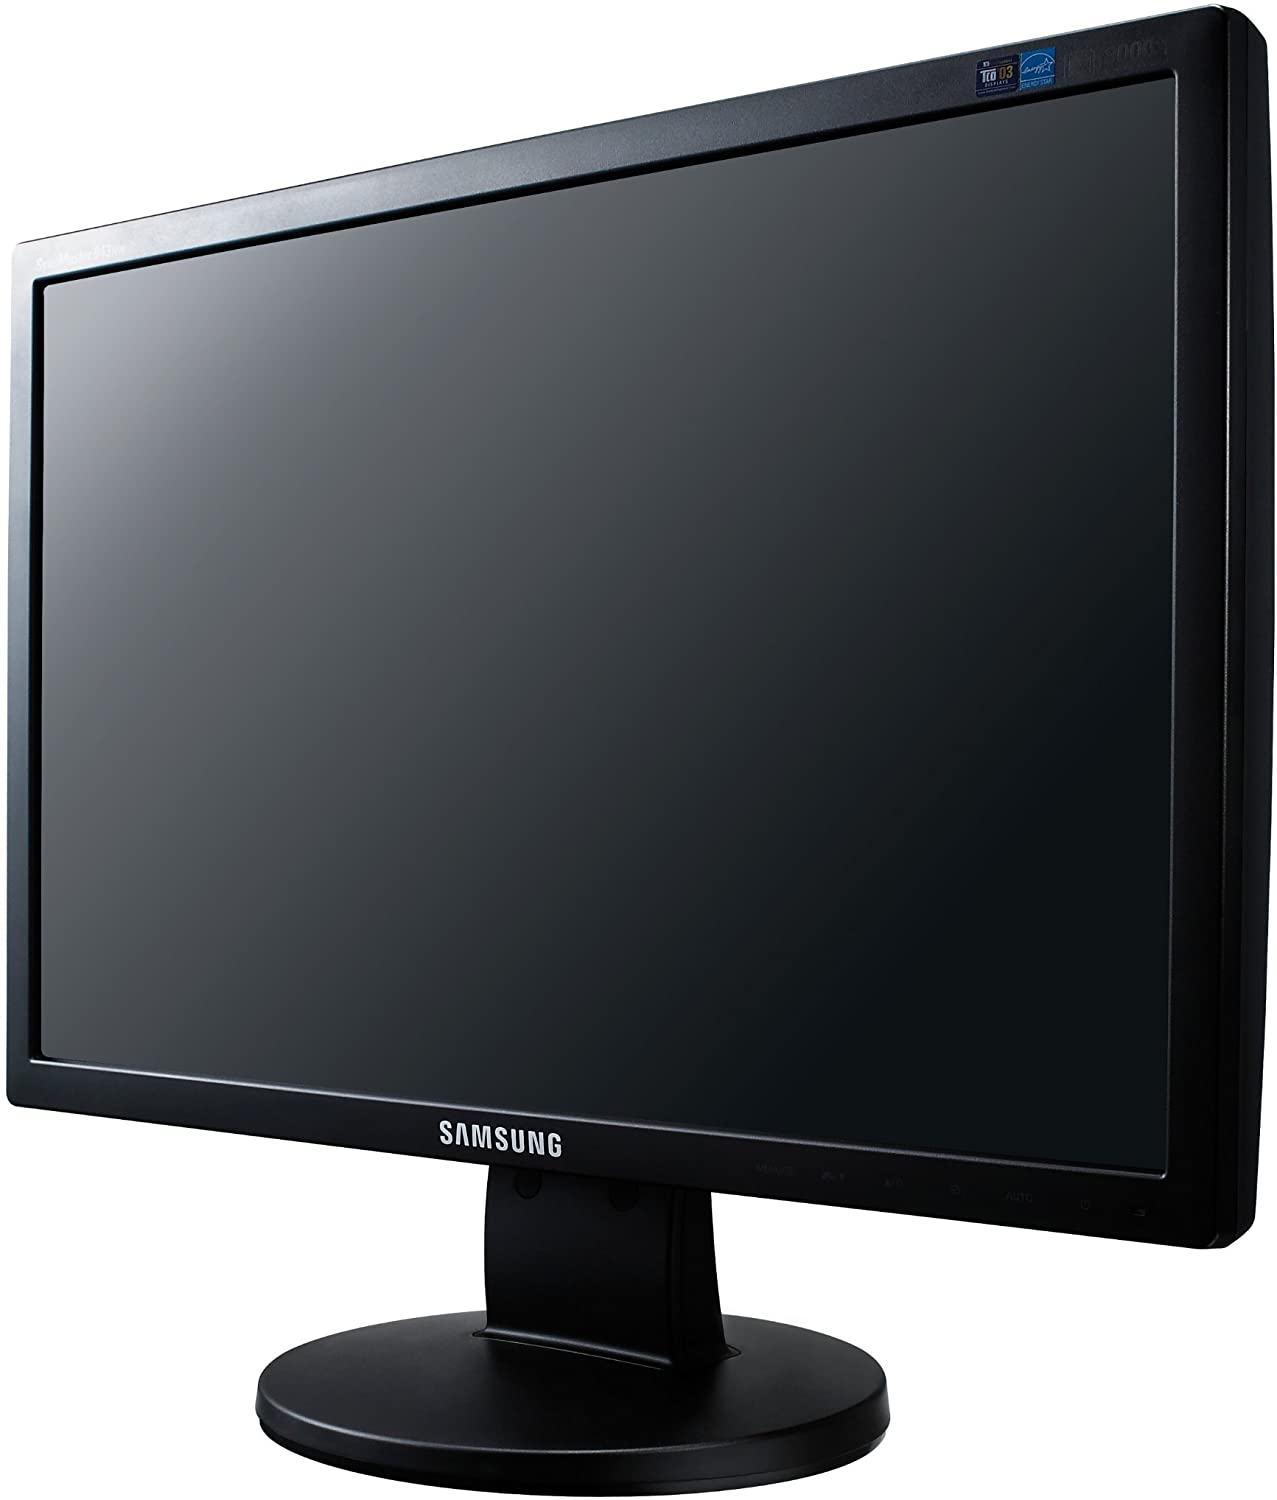 Samsung SyncMaster 943NW LCD-Monitor, 19 Zoll, 1440 x 900 Pixel, Kontrast 1000:1, Helligkeit 300 cd/m², Reaktionszeit 5 ms, VGA